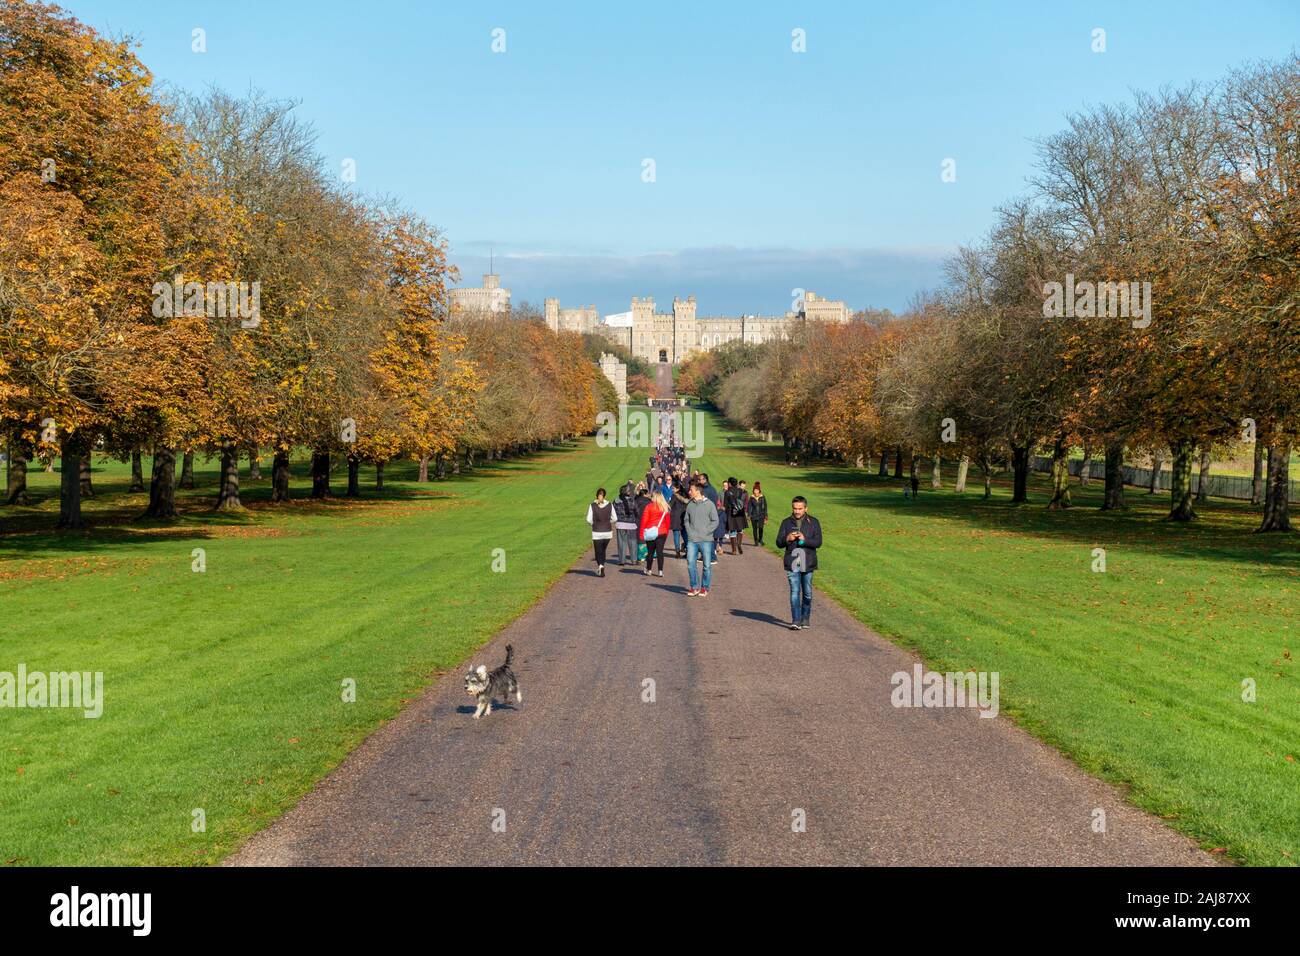 Walkers on the Long Walk with Windsor Castle in the distance, Windsor Great Park, Windsor, Berkshire, England, United Kingdom Stock Photo